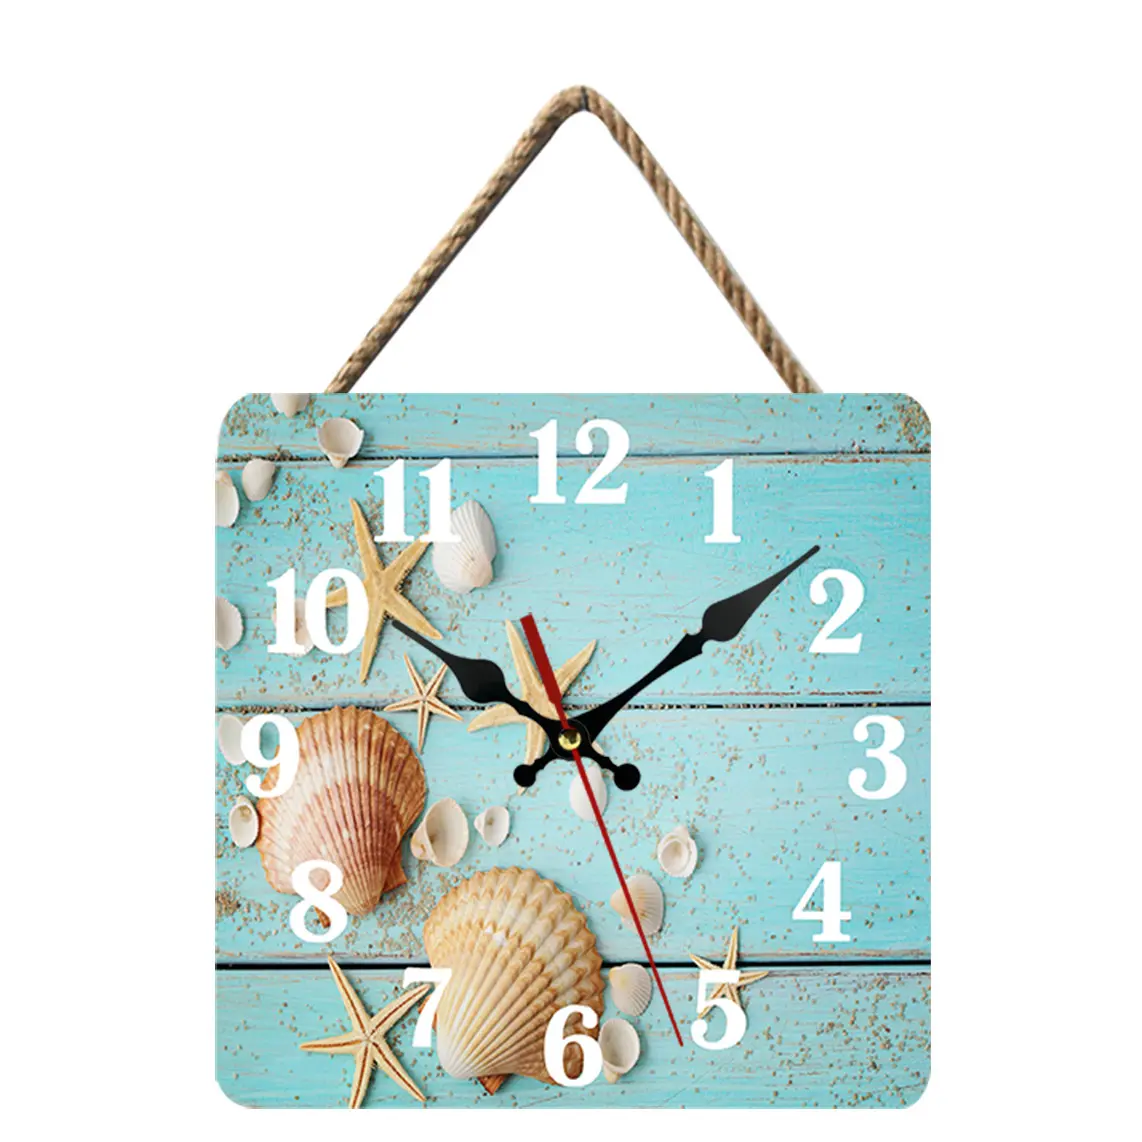 High Quality Home Decor Wall Clock Square Frame Vintage Wall Clock For Dining Room With Lanyad